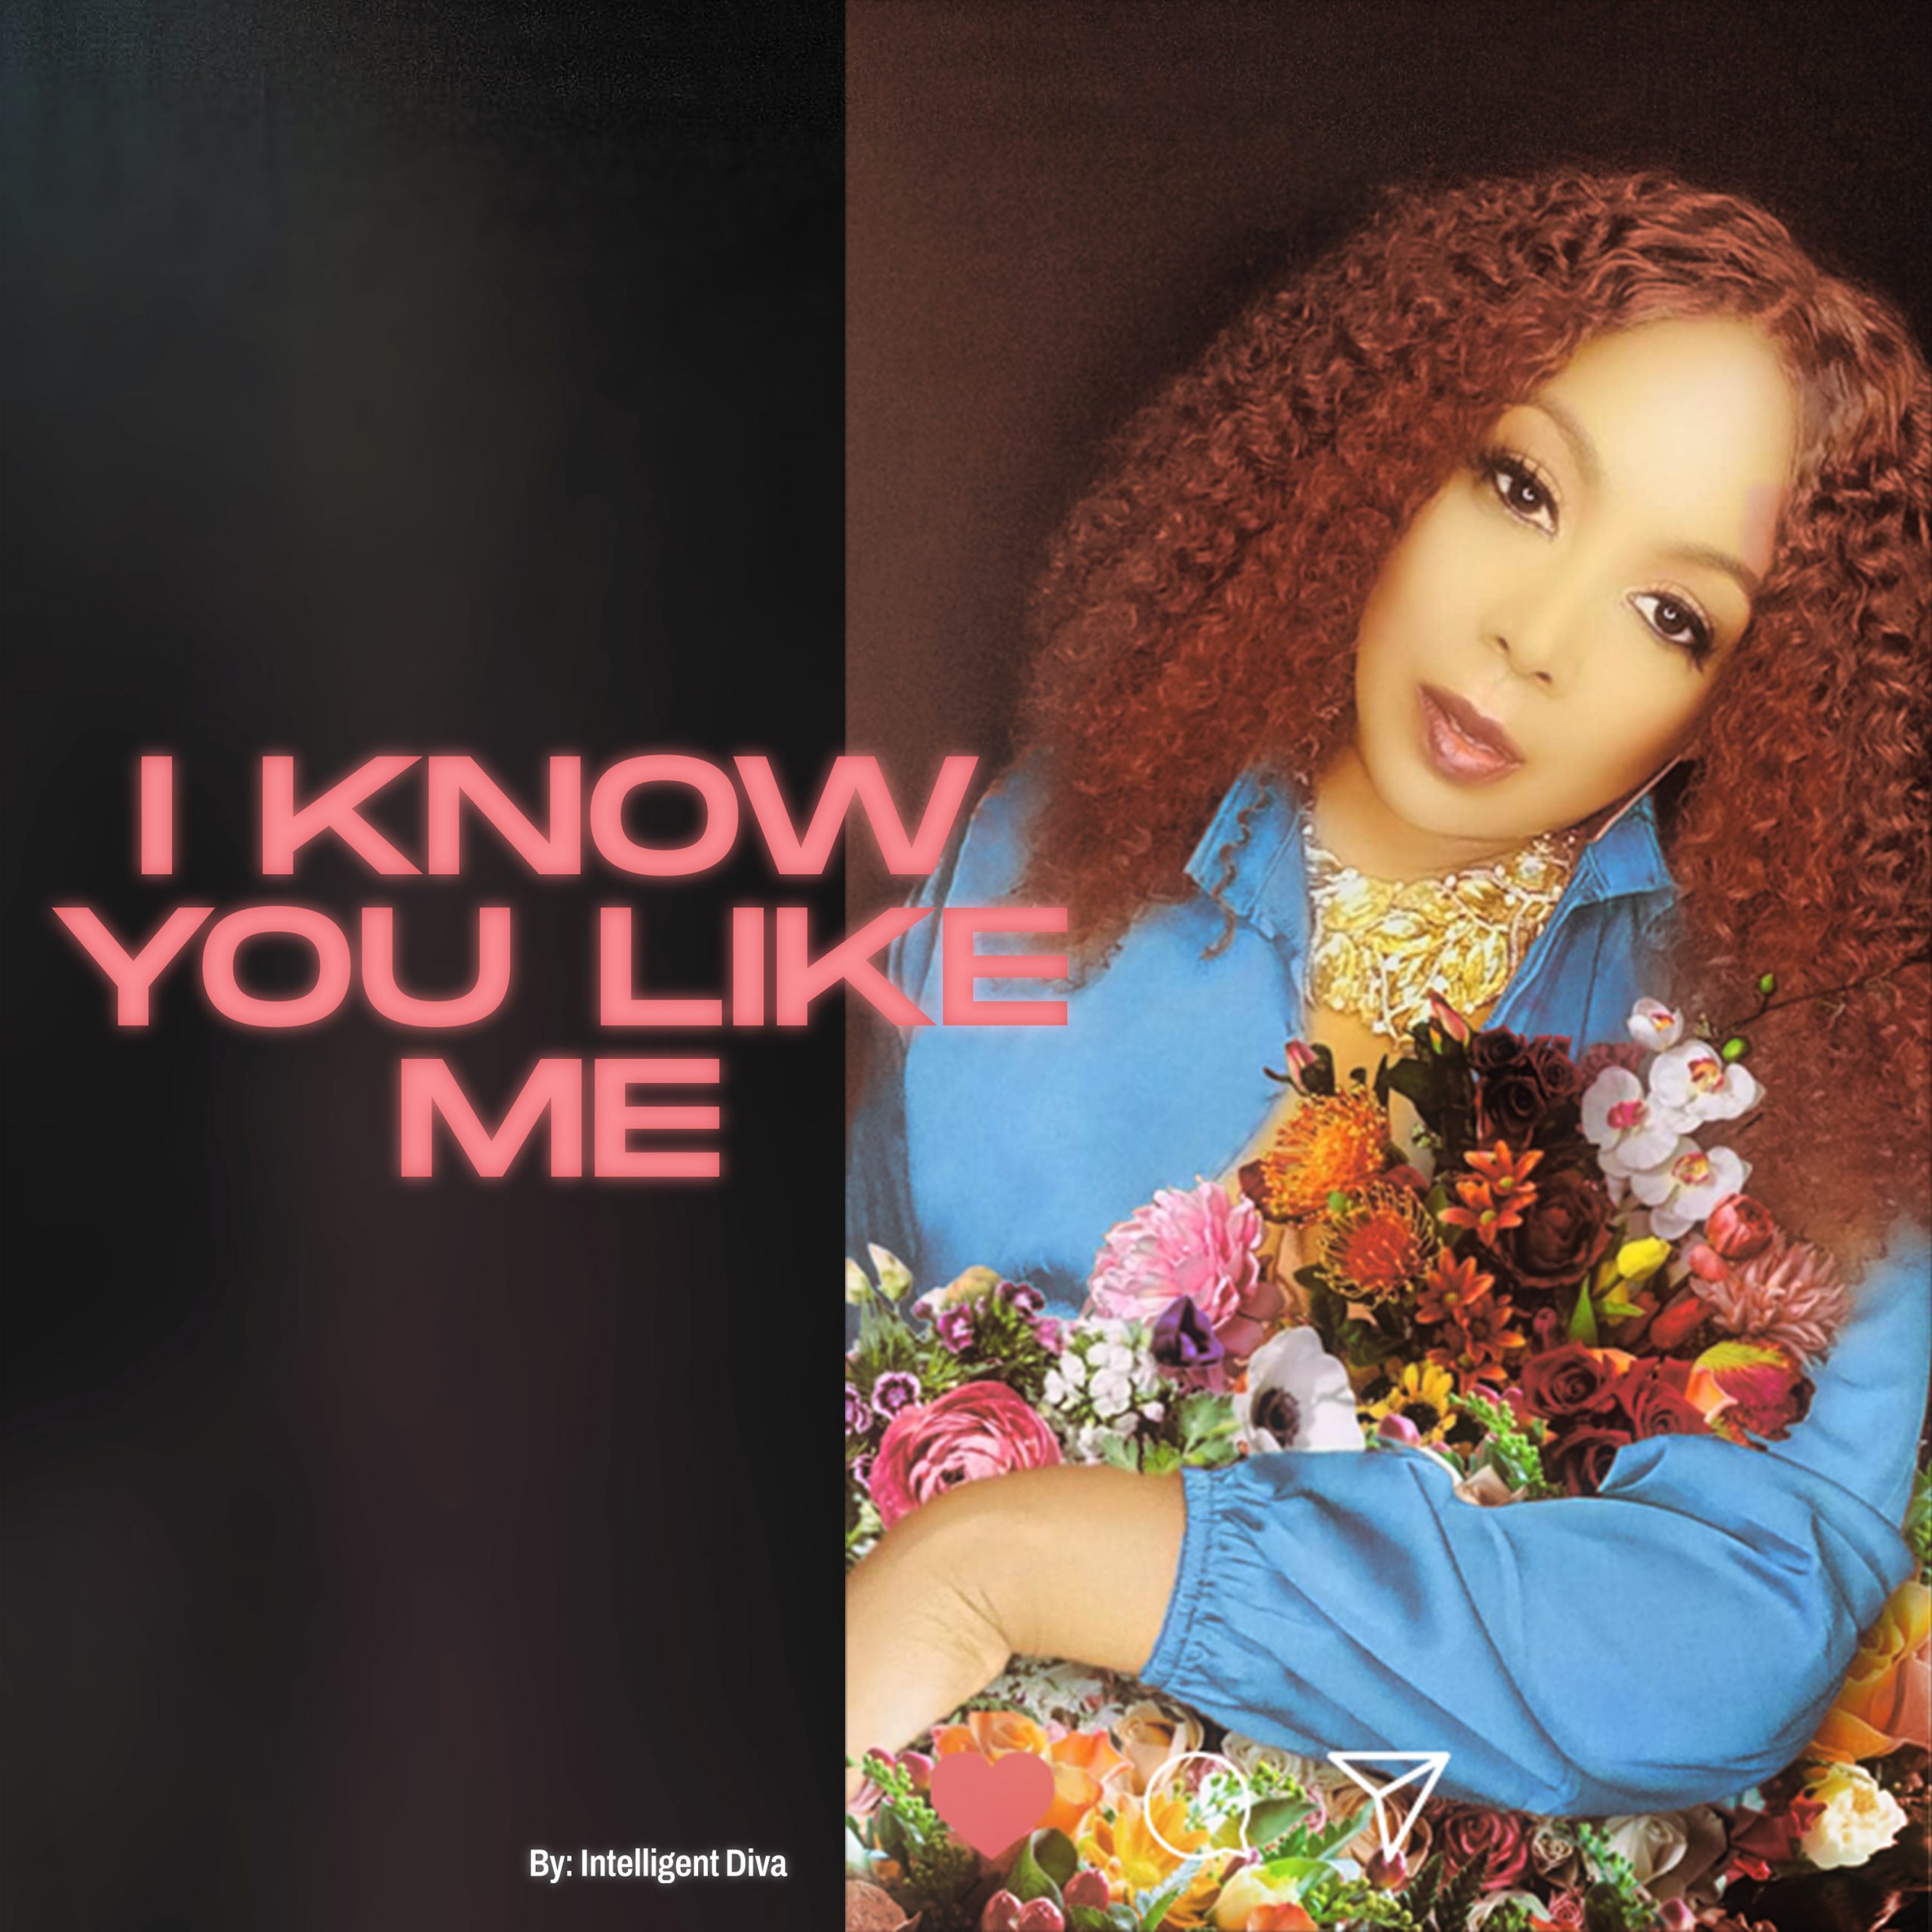 The new single ‘I Know You Like Me’ from ‘Intelligent Diva’ with its energetic, intense, soothing and emotive production is on the playlist now.